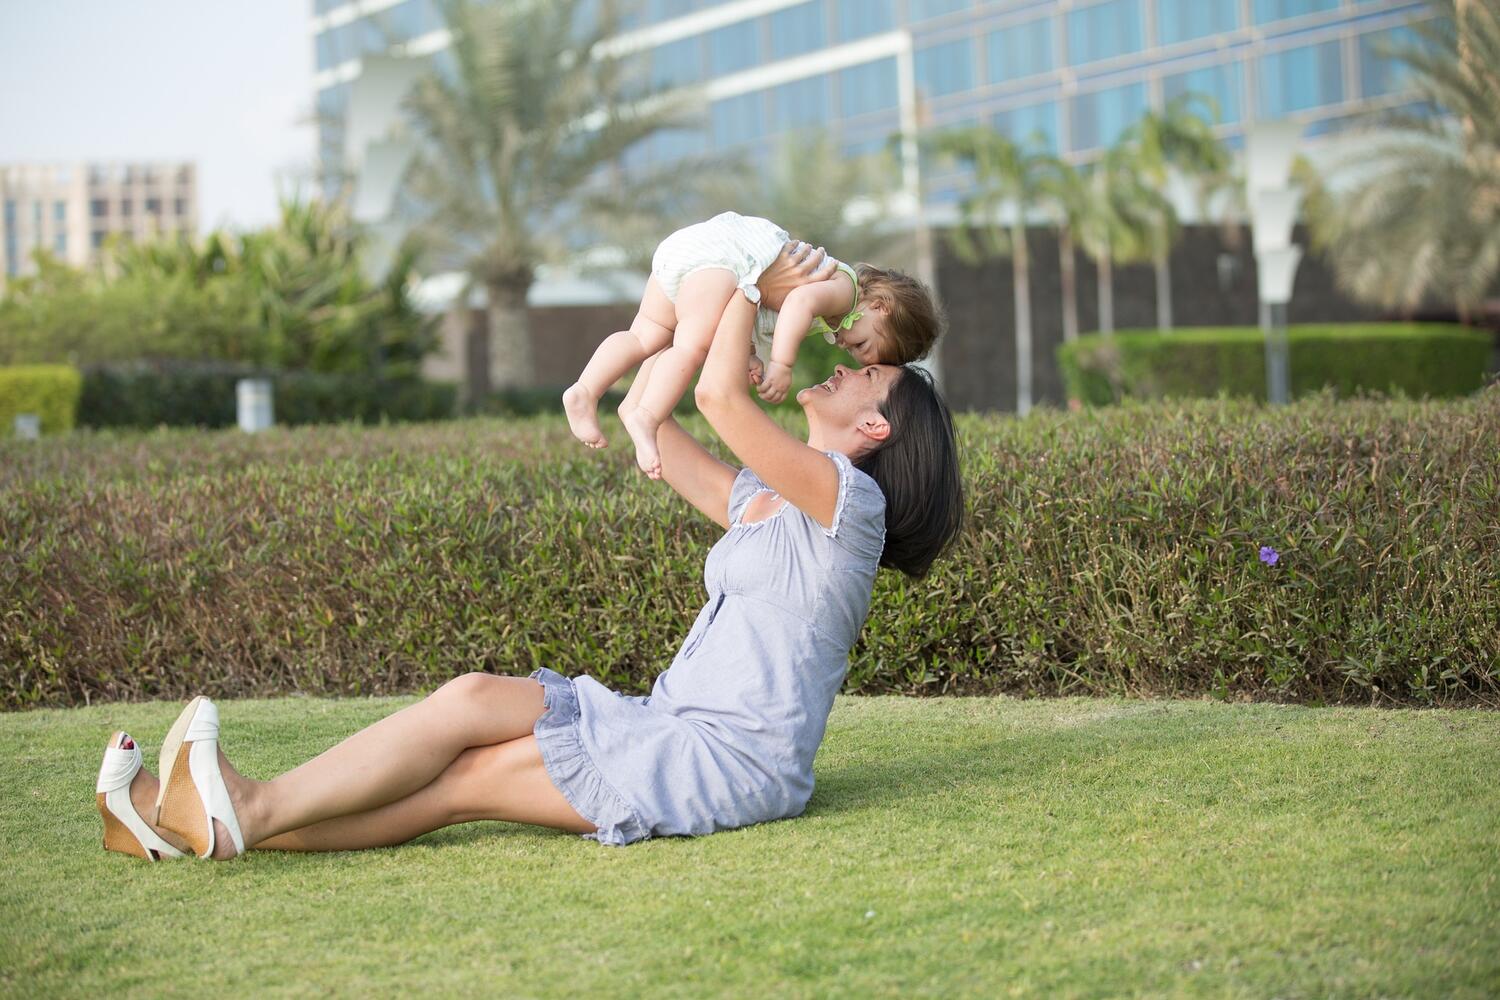  Parents Are More Dedicated Than Co-Workers Without Kids, But Moms Still Face Penalty